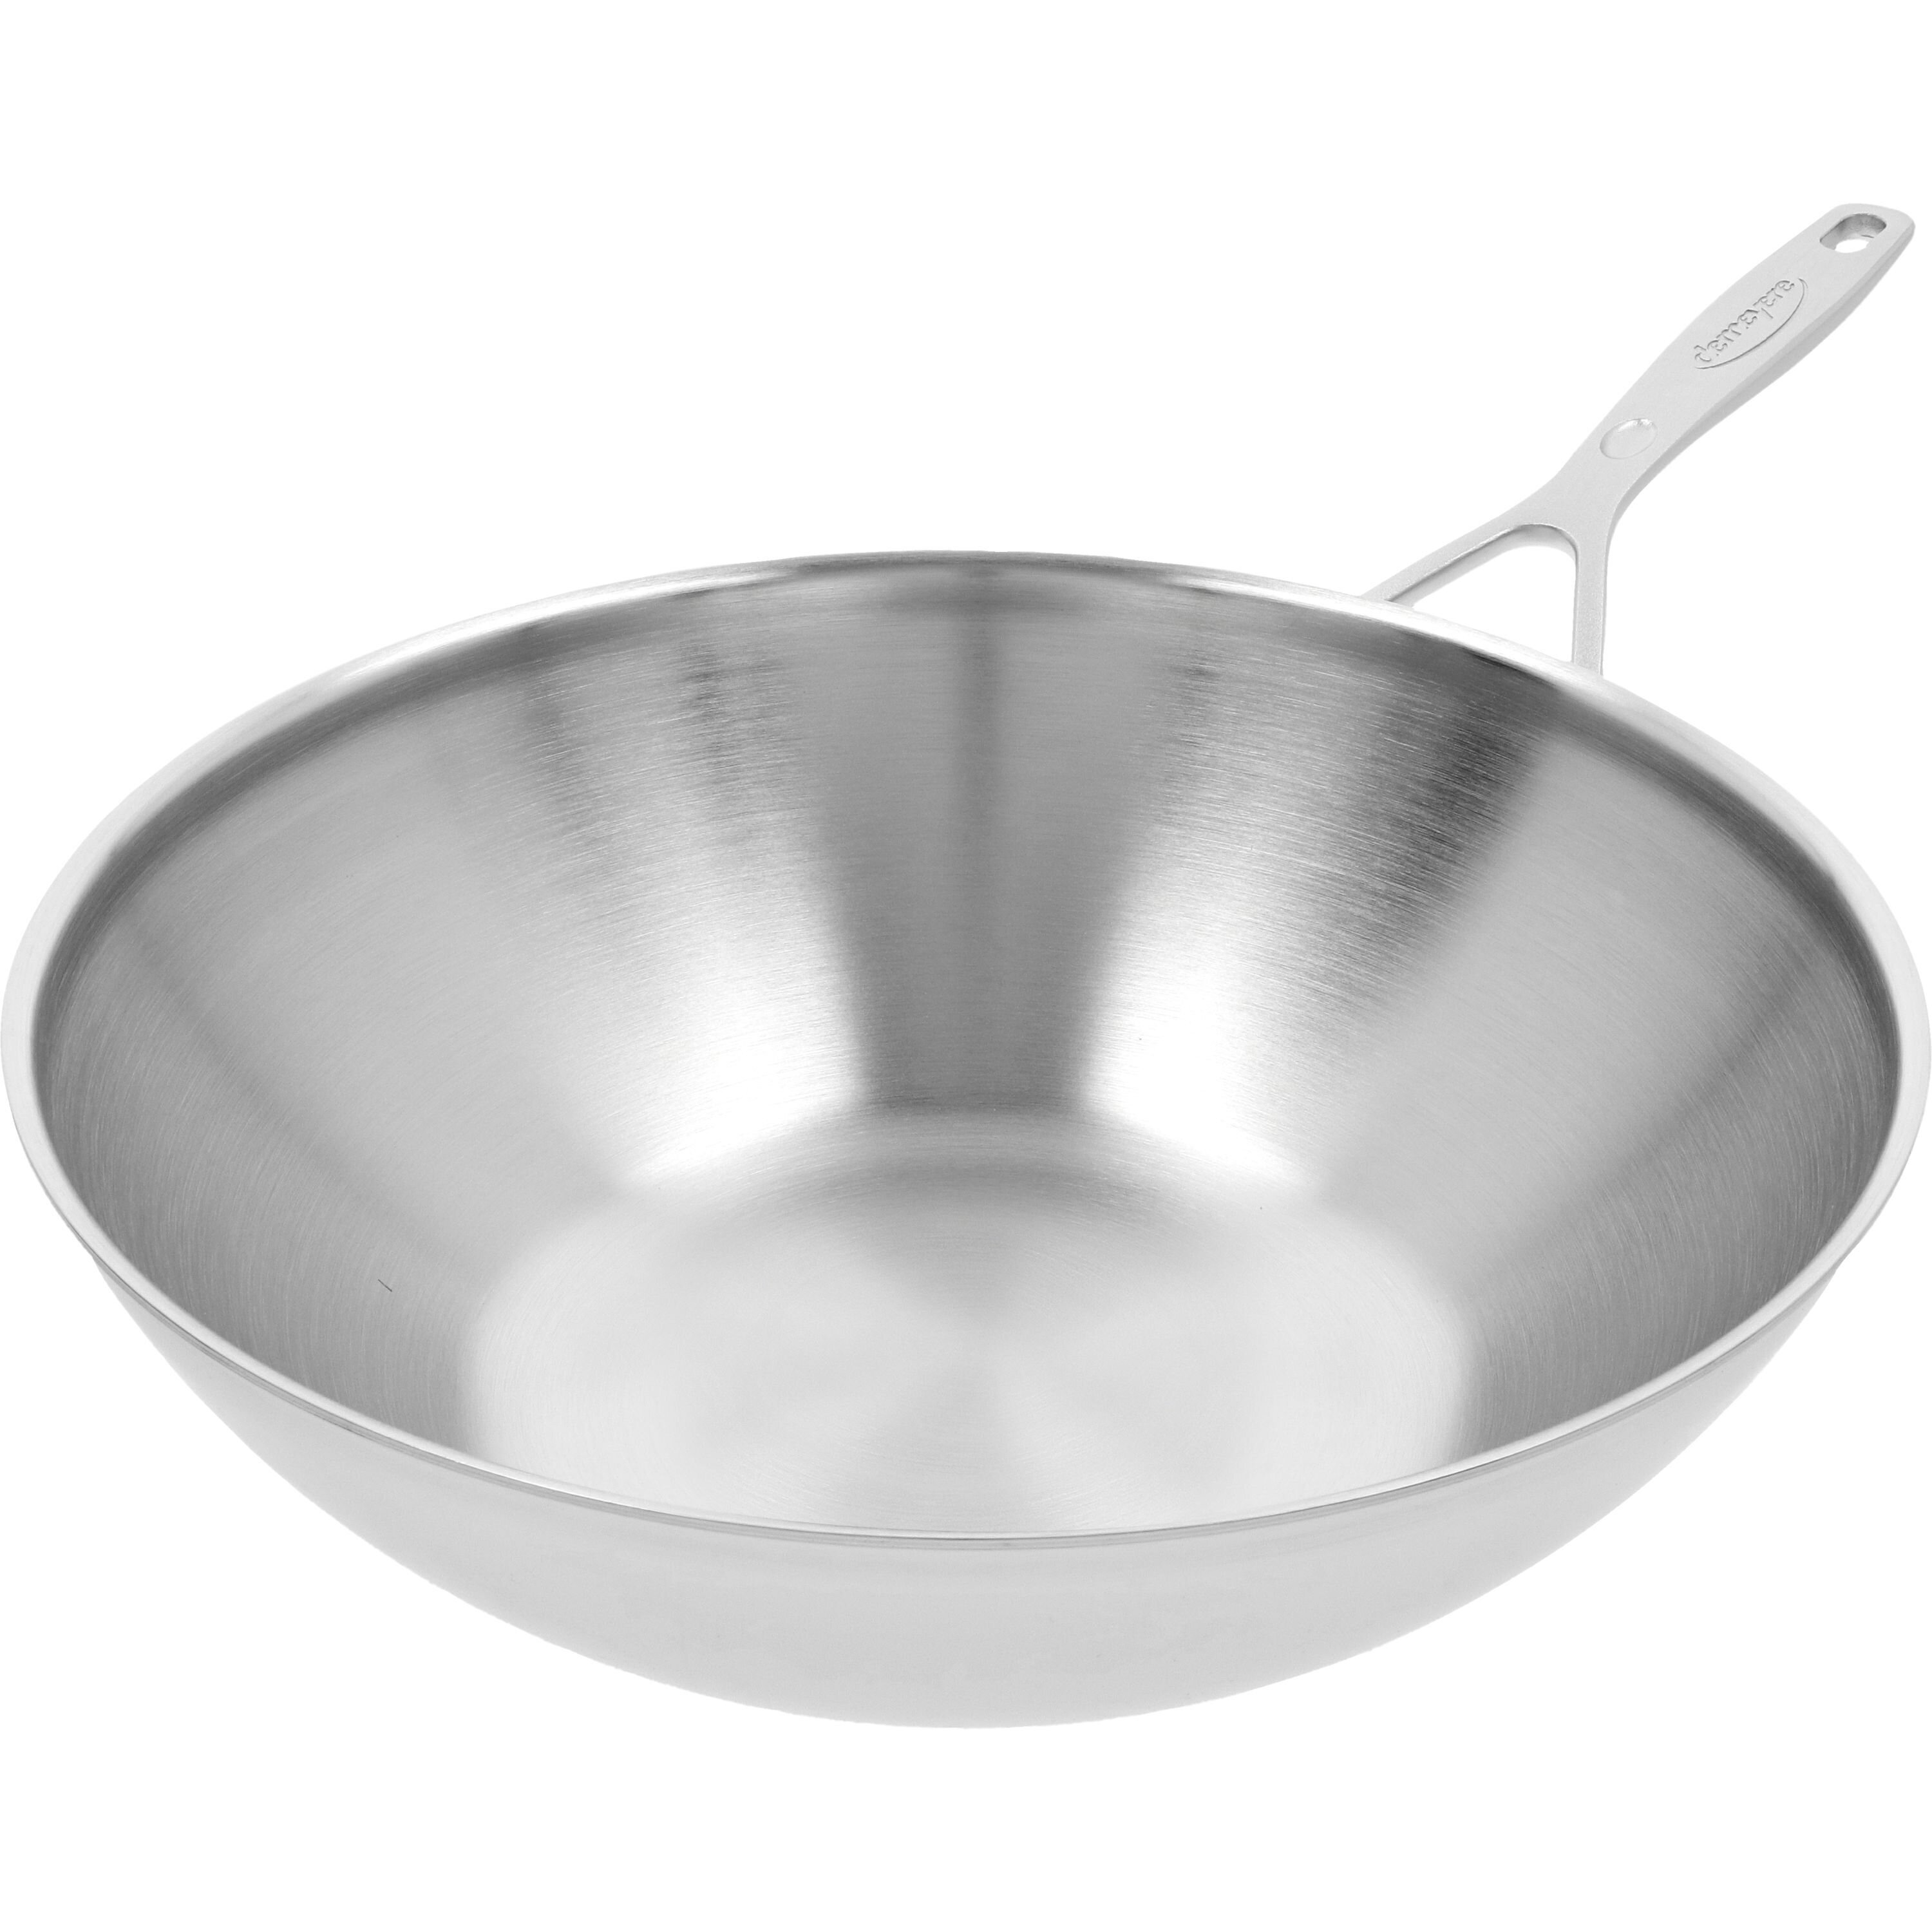 Demeyere Essential 5-Ply 12.5-Inch Stainless Steel Fry Pan With Lid -  Stainless Steel - 15 requests